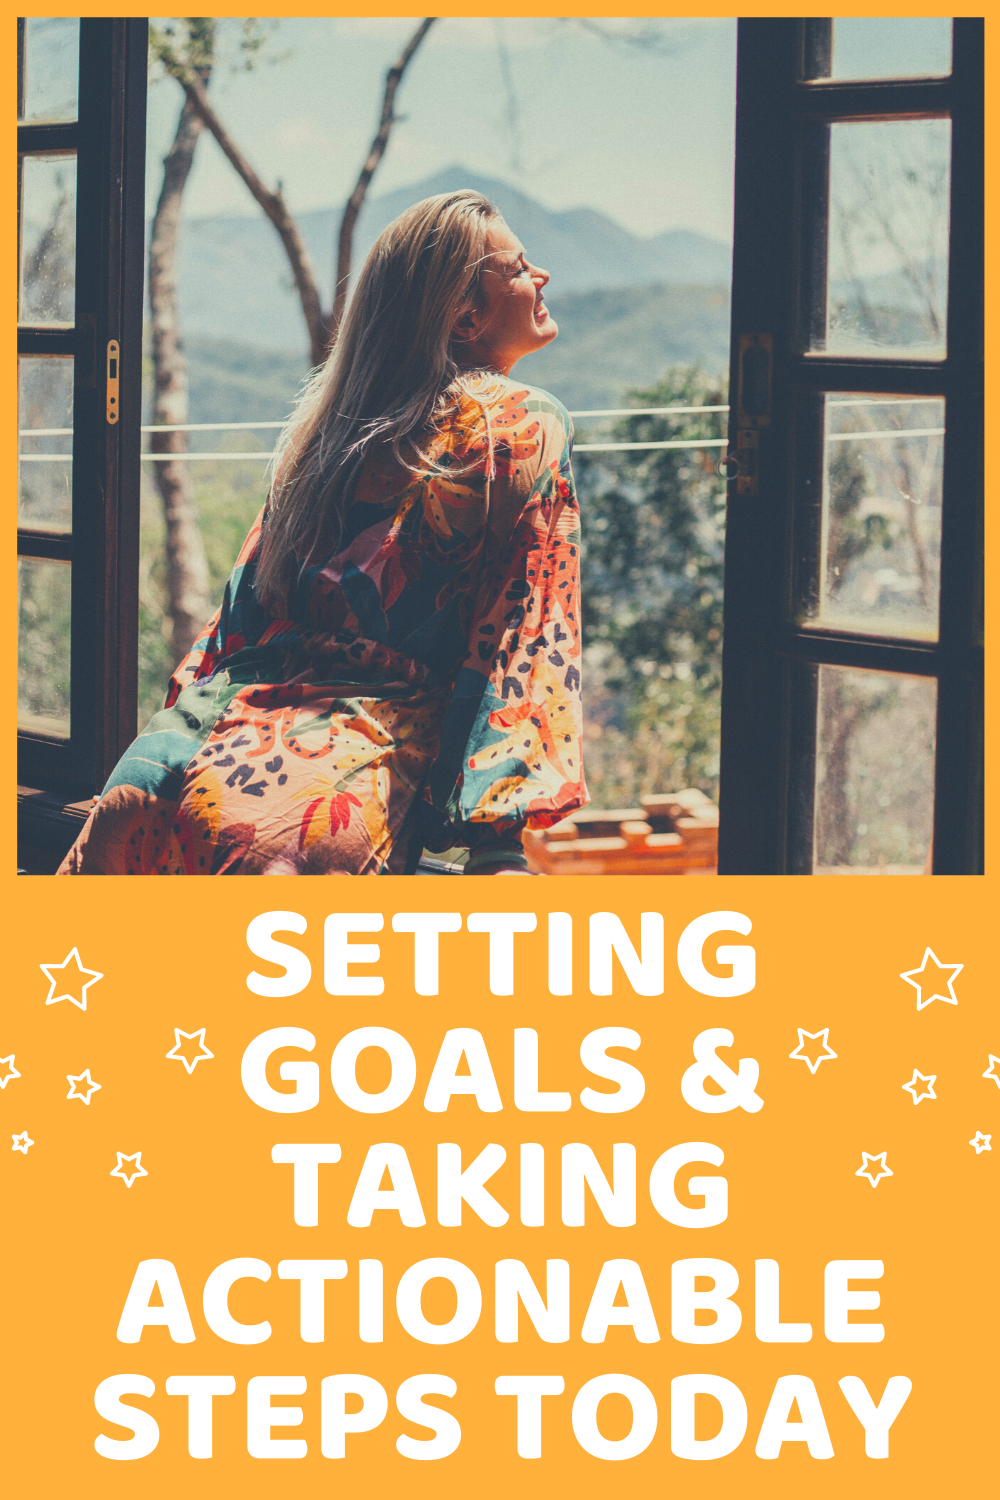 Setting goals and taking actionable steps today!